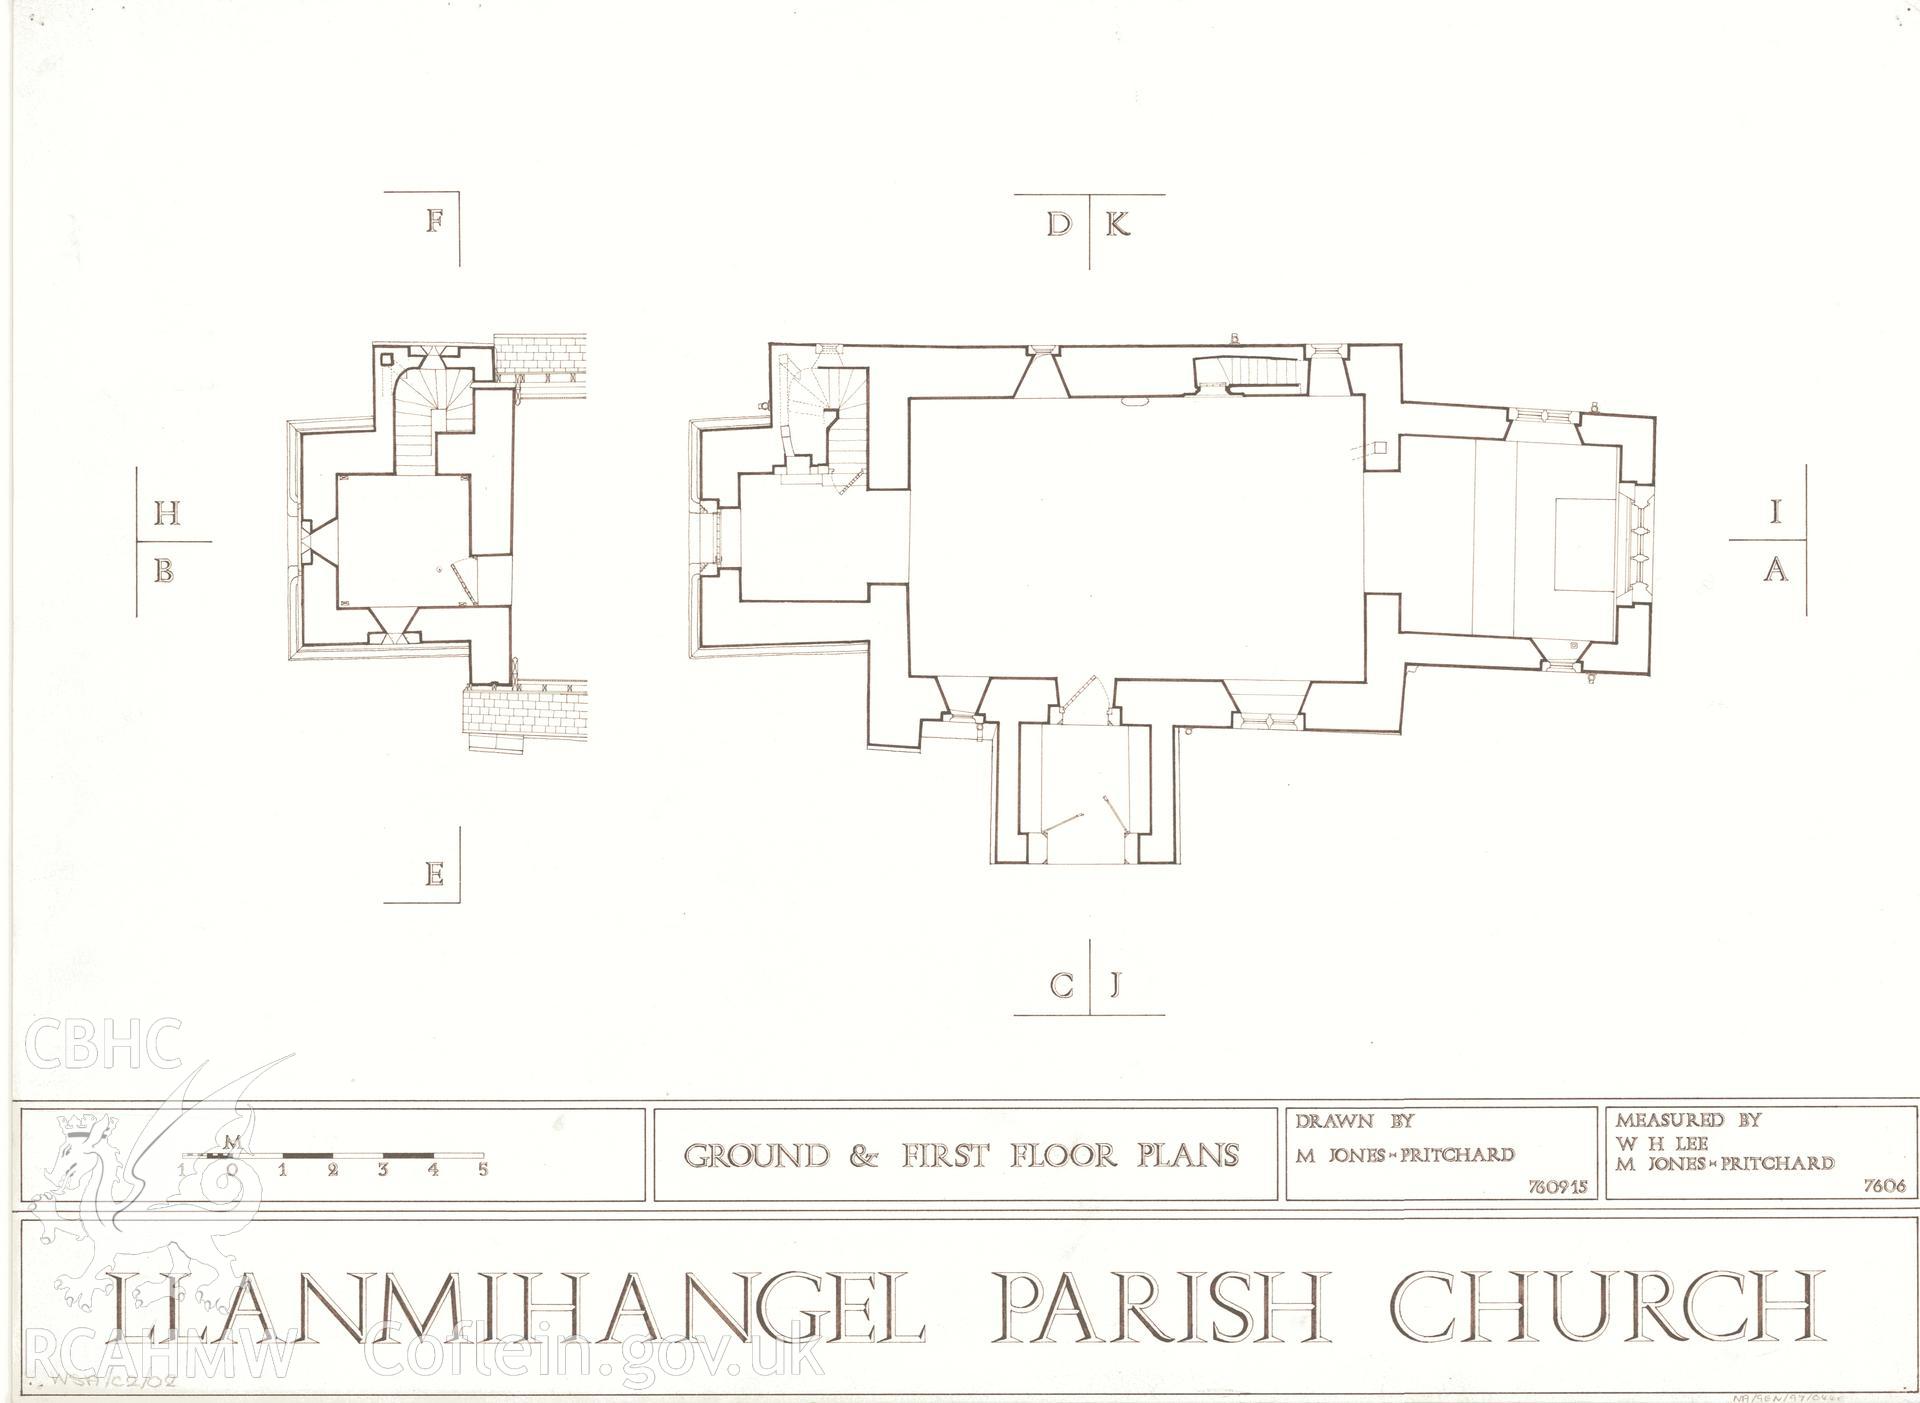 Measured drawing showing ground and first floor plans of Llanmihangel Parish Church, produced by M. Jones-Pritchard and W.H. Lee, 1976.